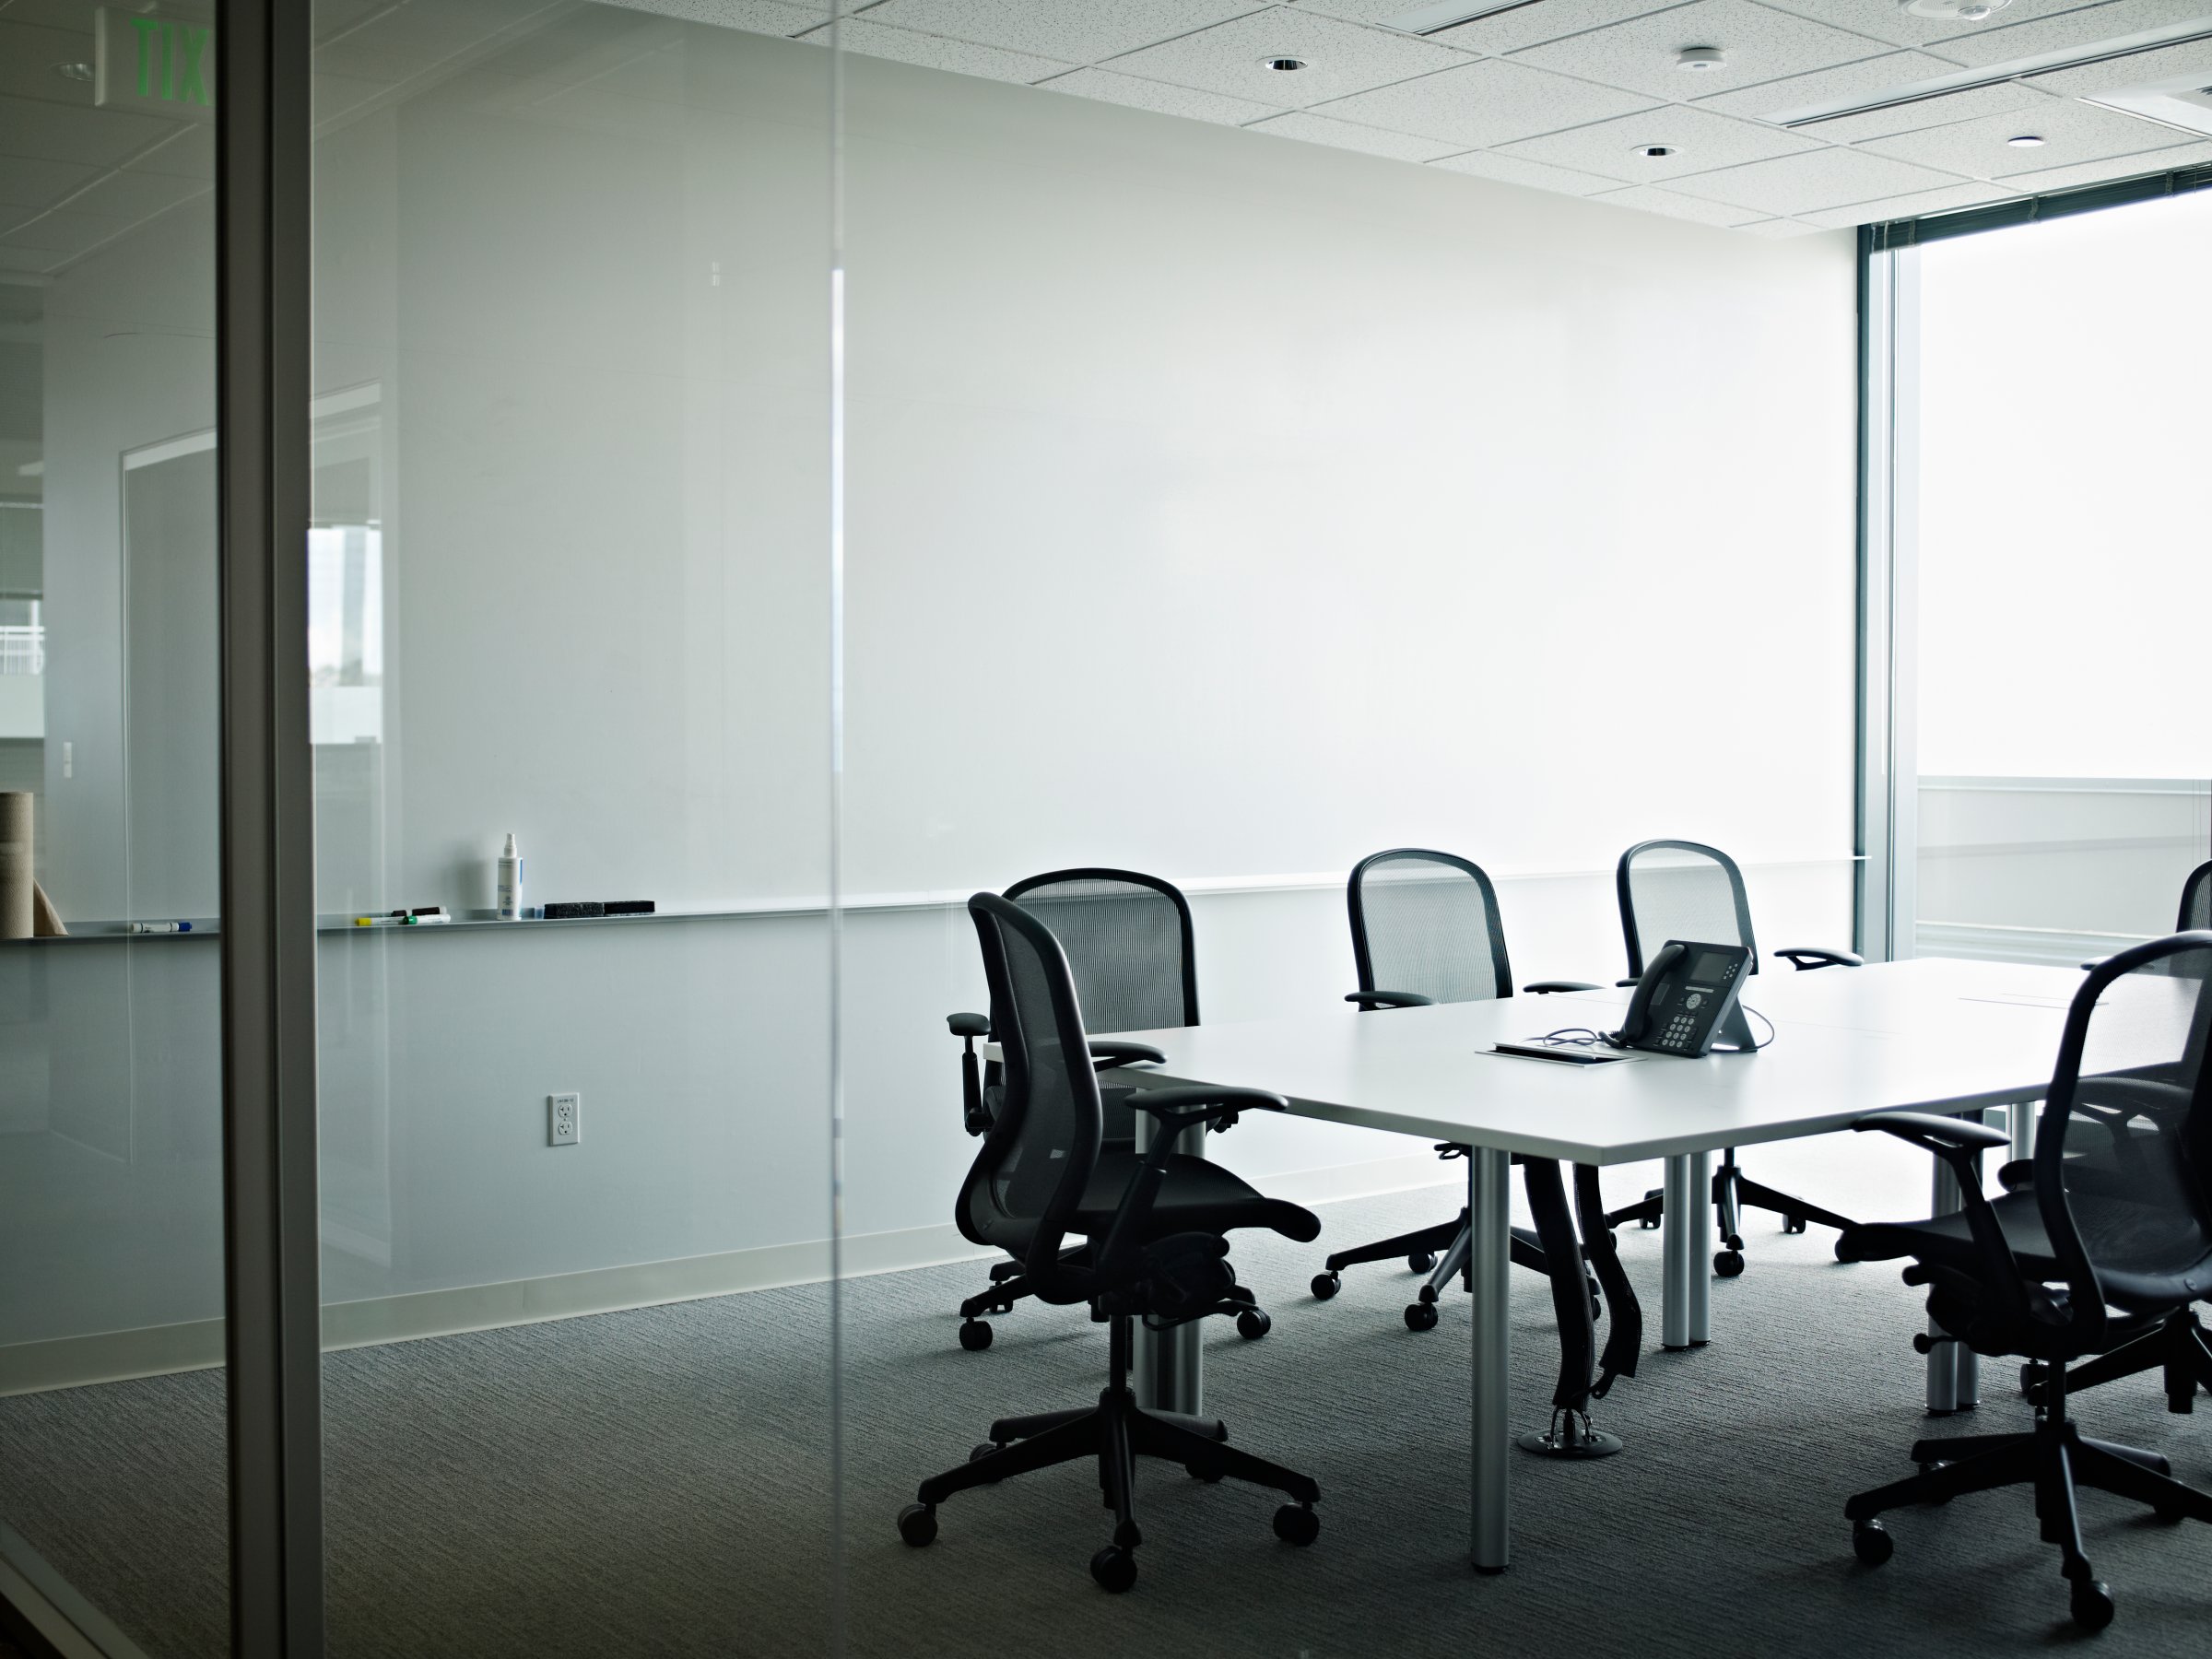 Empty office conference room with phone on table